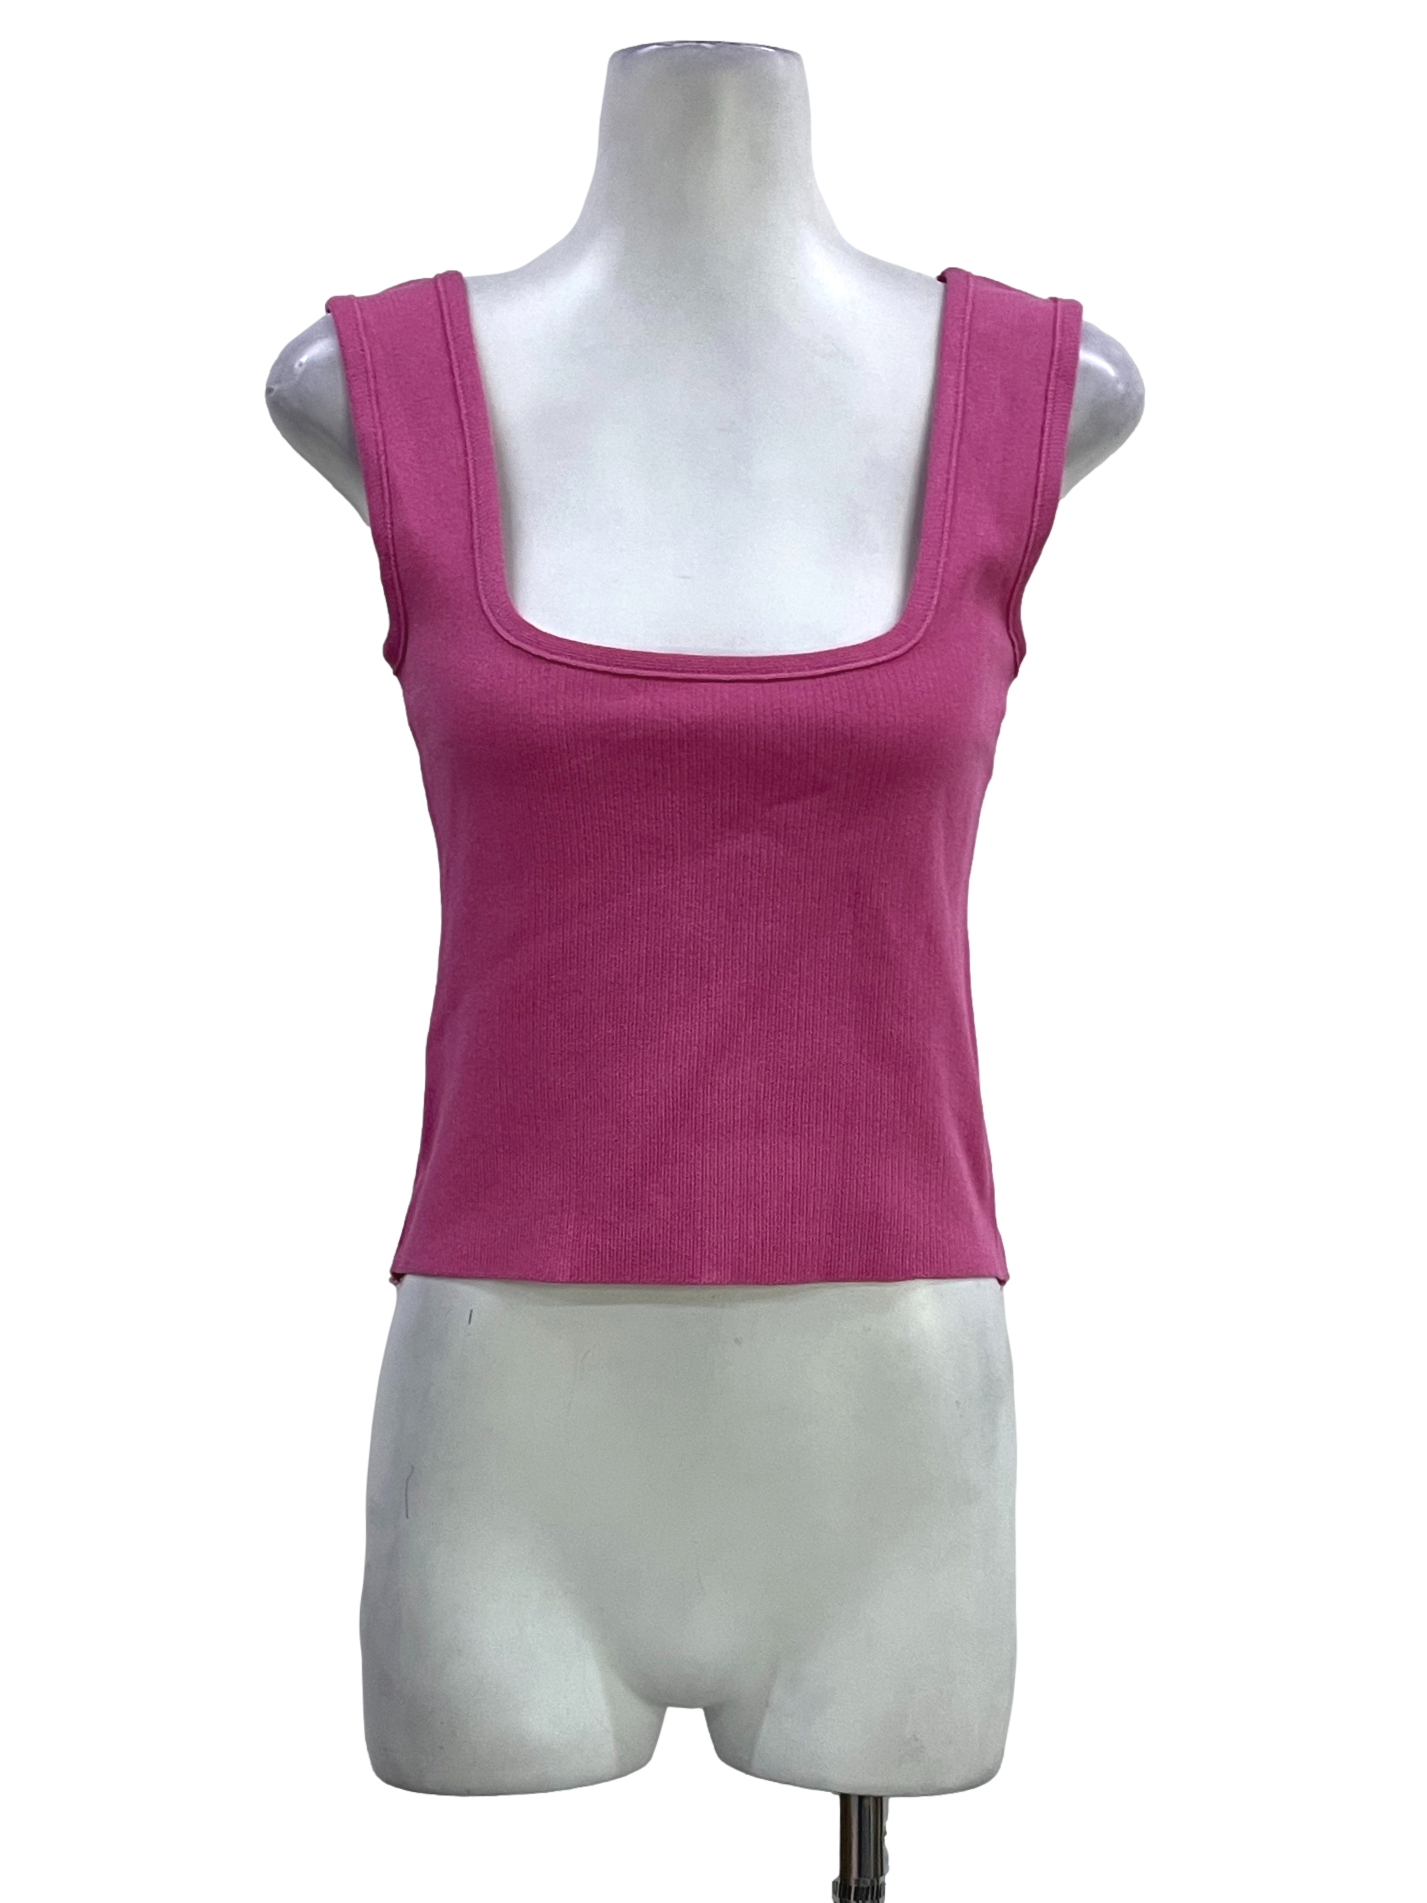 Hot Pink Square Neck Sleeveless Top